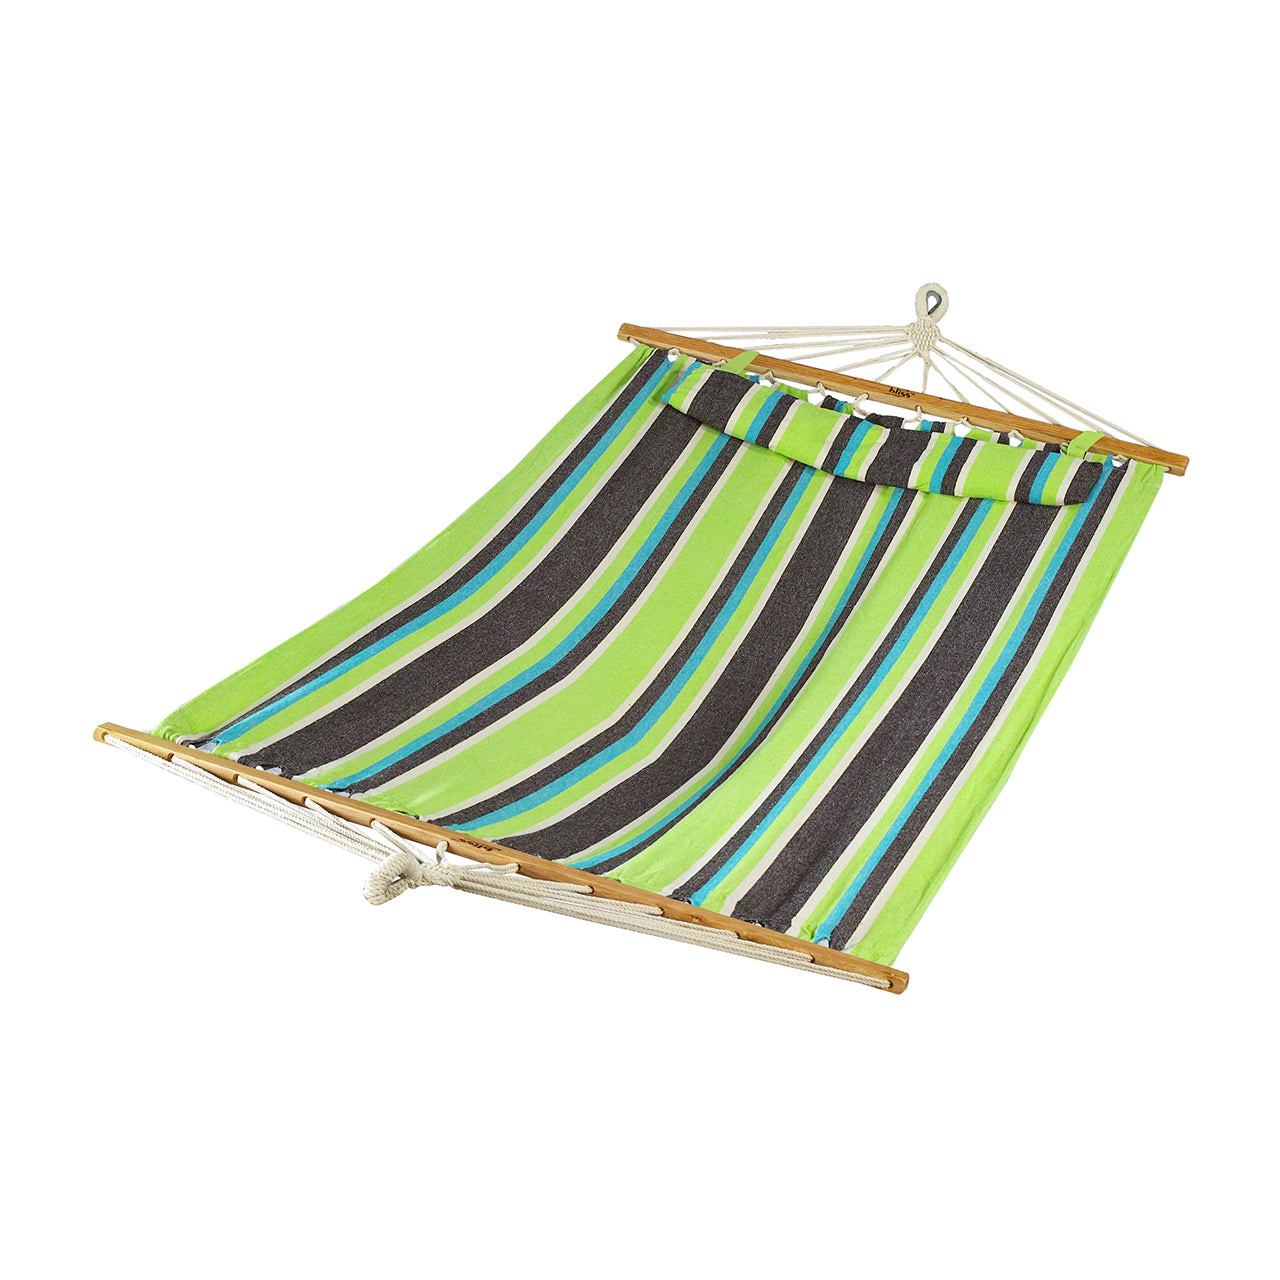 Bliss Hammocks 48-inch Wide Caribbean Hammock with Pillow, Velcro Straps, and Chains in the country club variation.